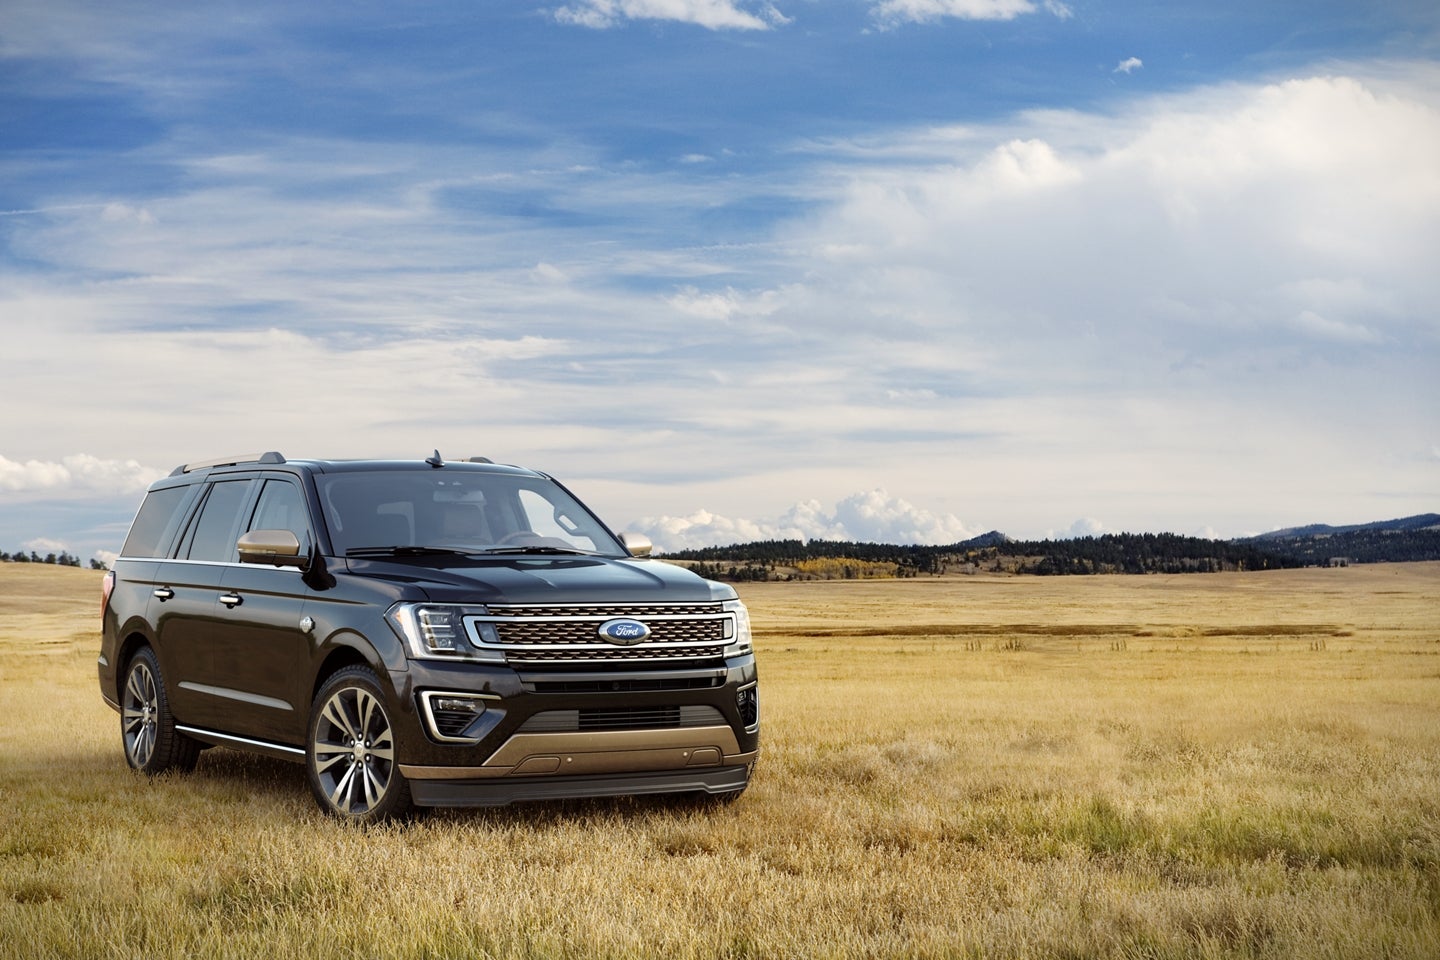 2020 Ford Expedition for Sale near Fort Rucker, AL